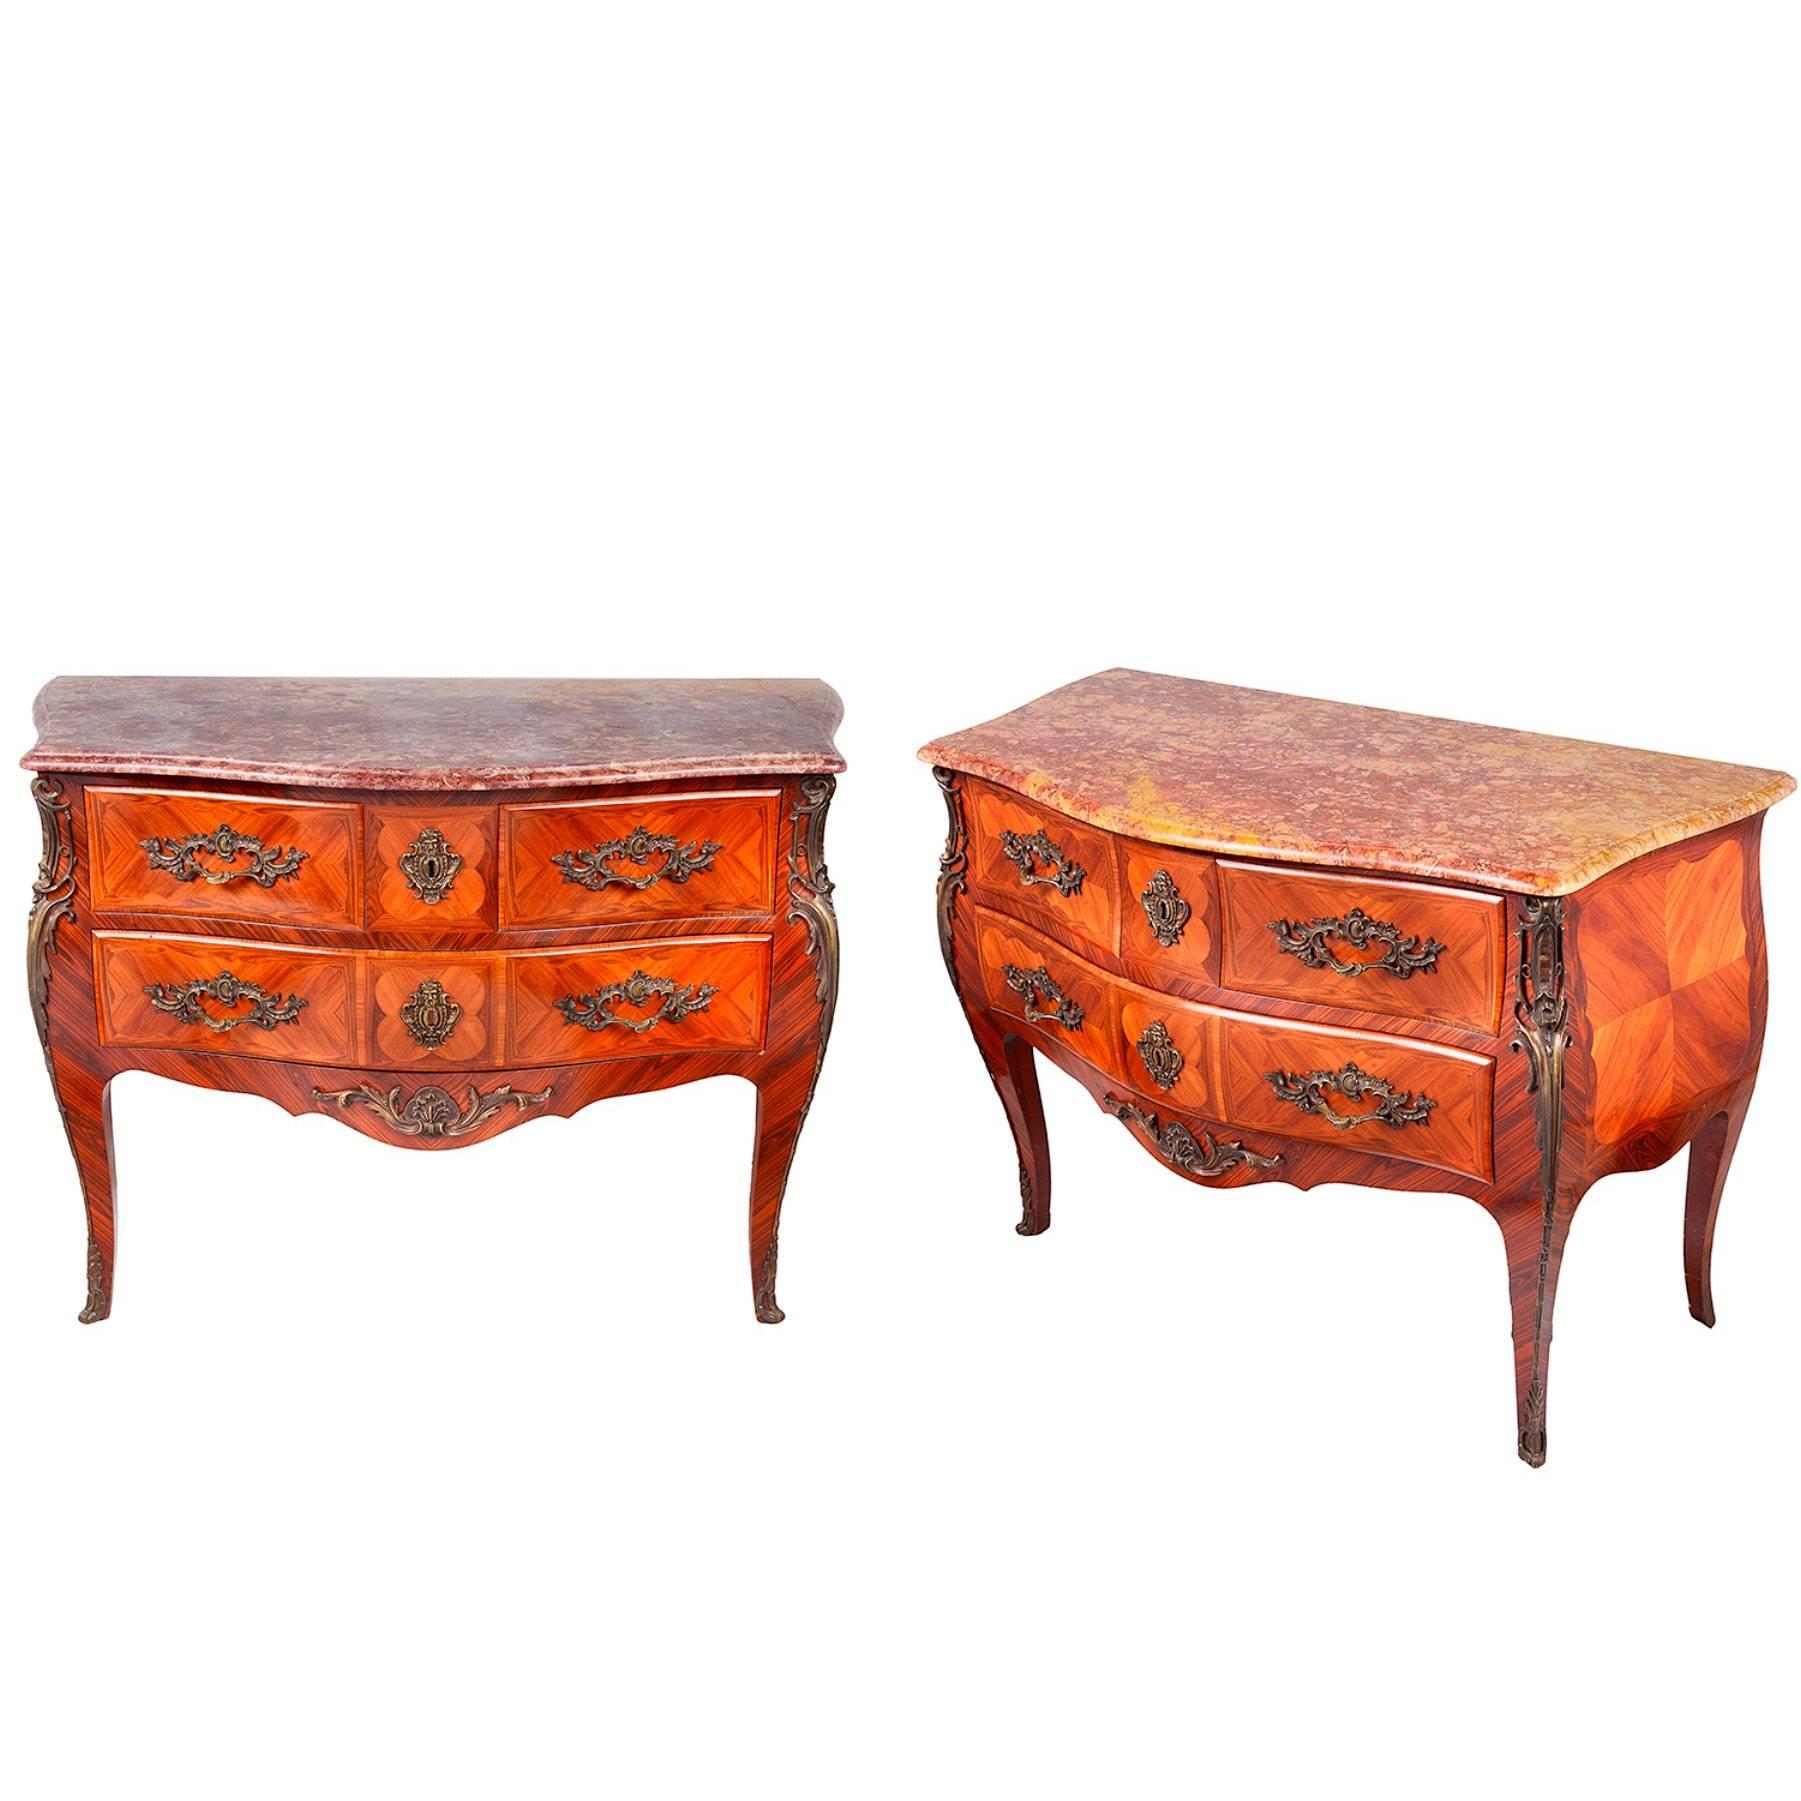 Pair of Louis XVI Style Commodes, Late 19th Century